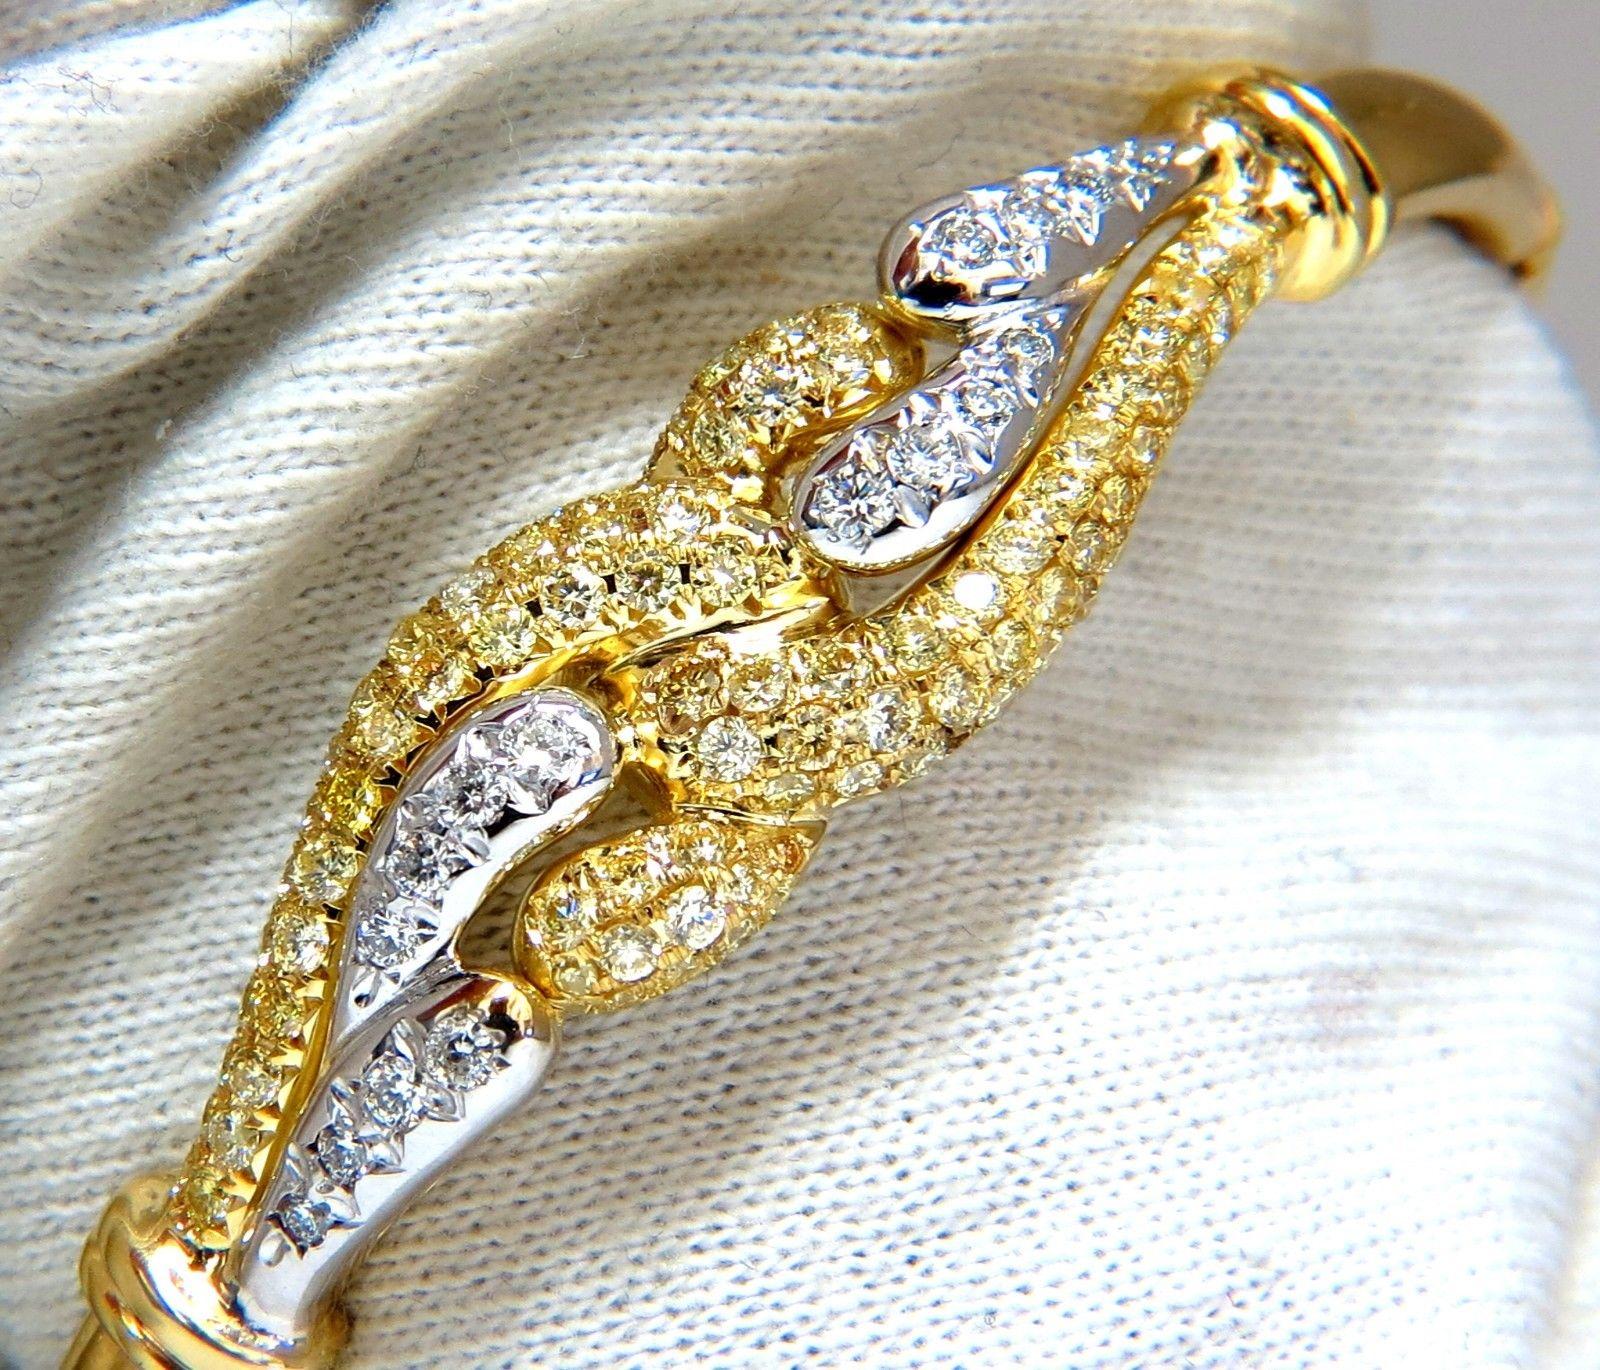  Double loop link Style

2.10ct Natural Fancy yellow diamonds bangle bracelet.

Vs-2 clarity

.40ct. diamonds (white).

Rounds, Full cuts.

G colors Vs-2 clarity. 

14kt. yellow gold 

18 Grams.

7 Inches (wearable length)

Top: 13.2mm